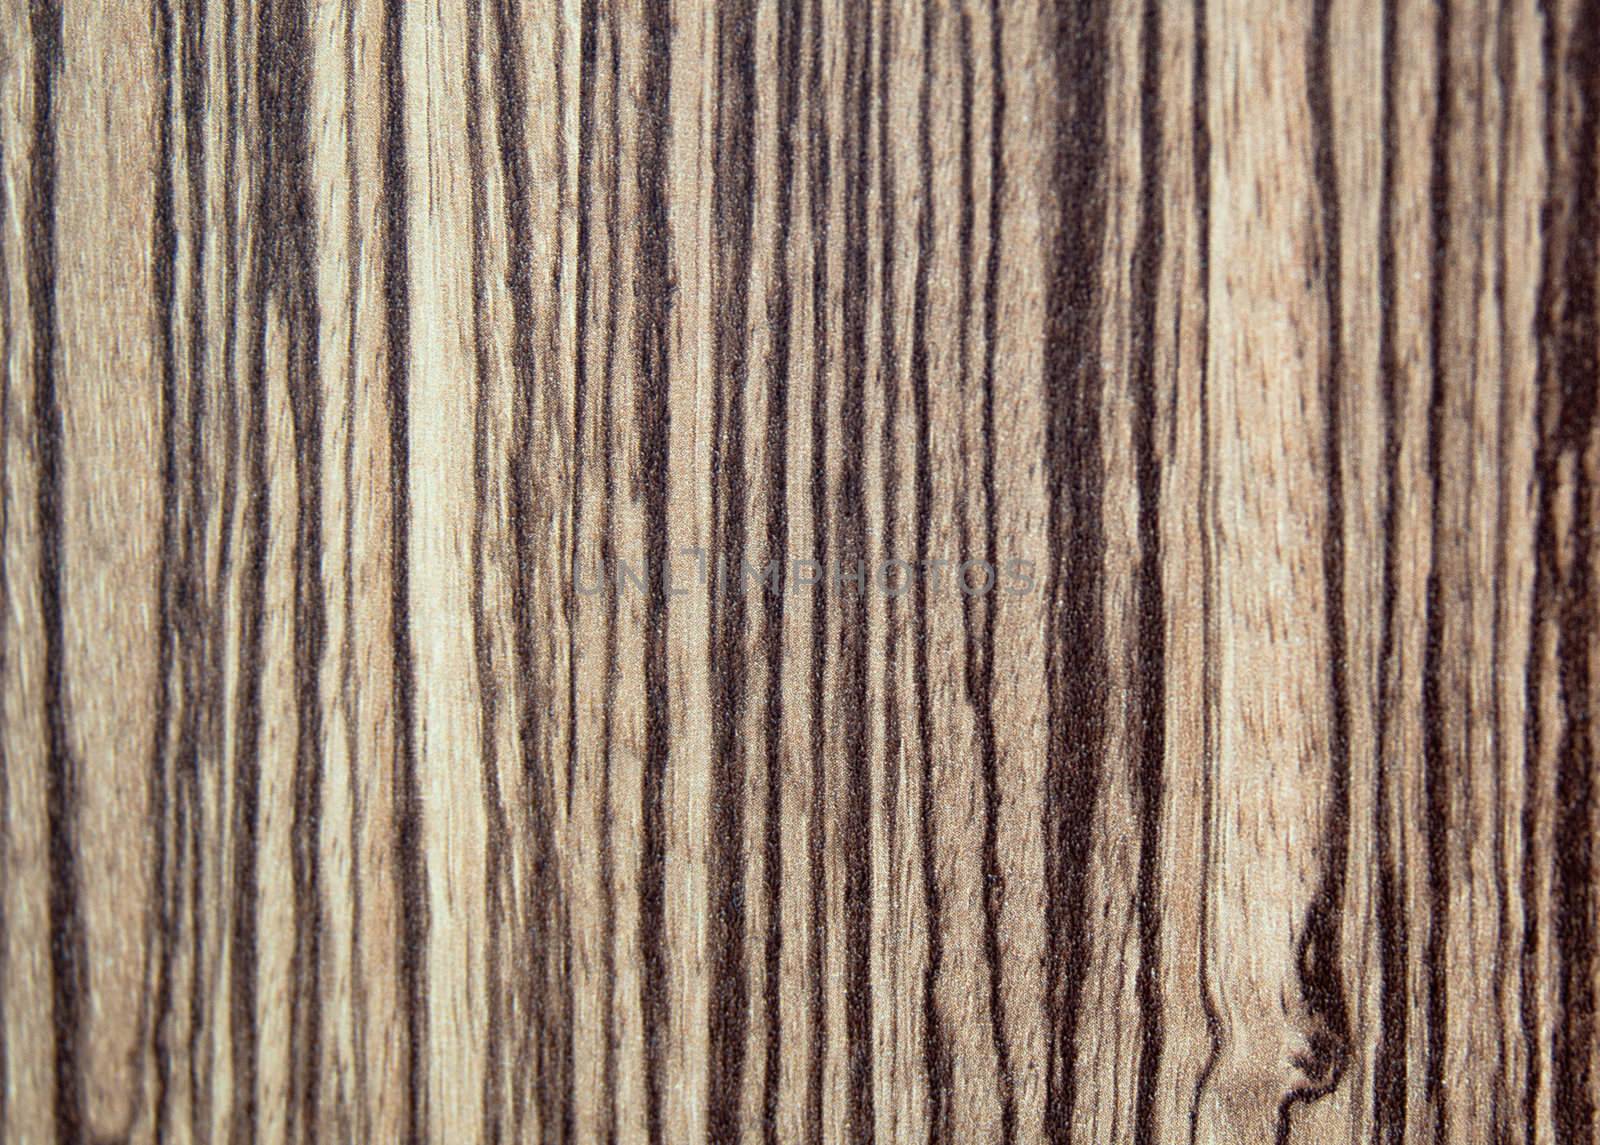 tree wood textured background with vertical stripes